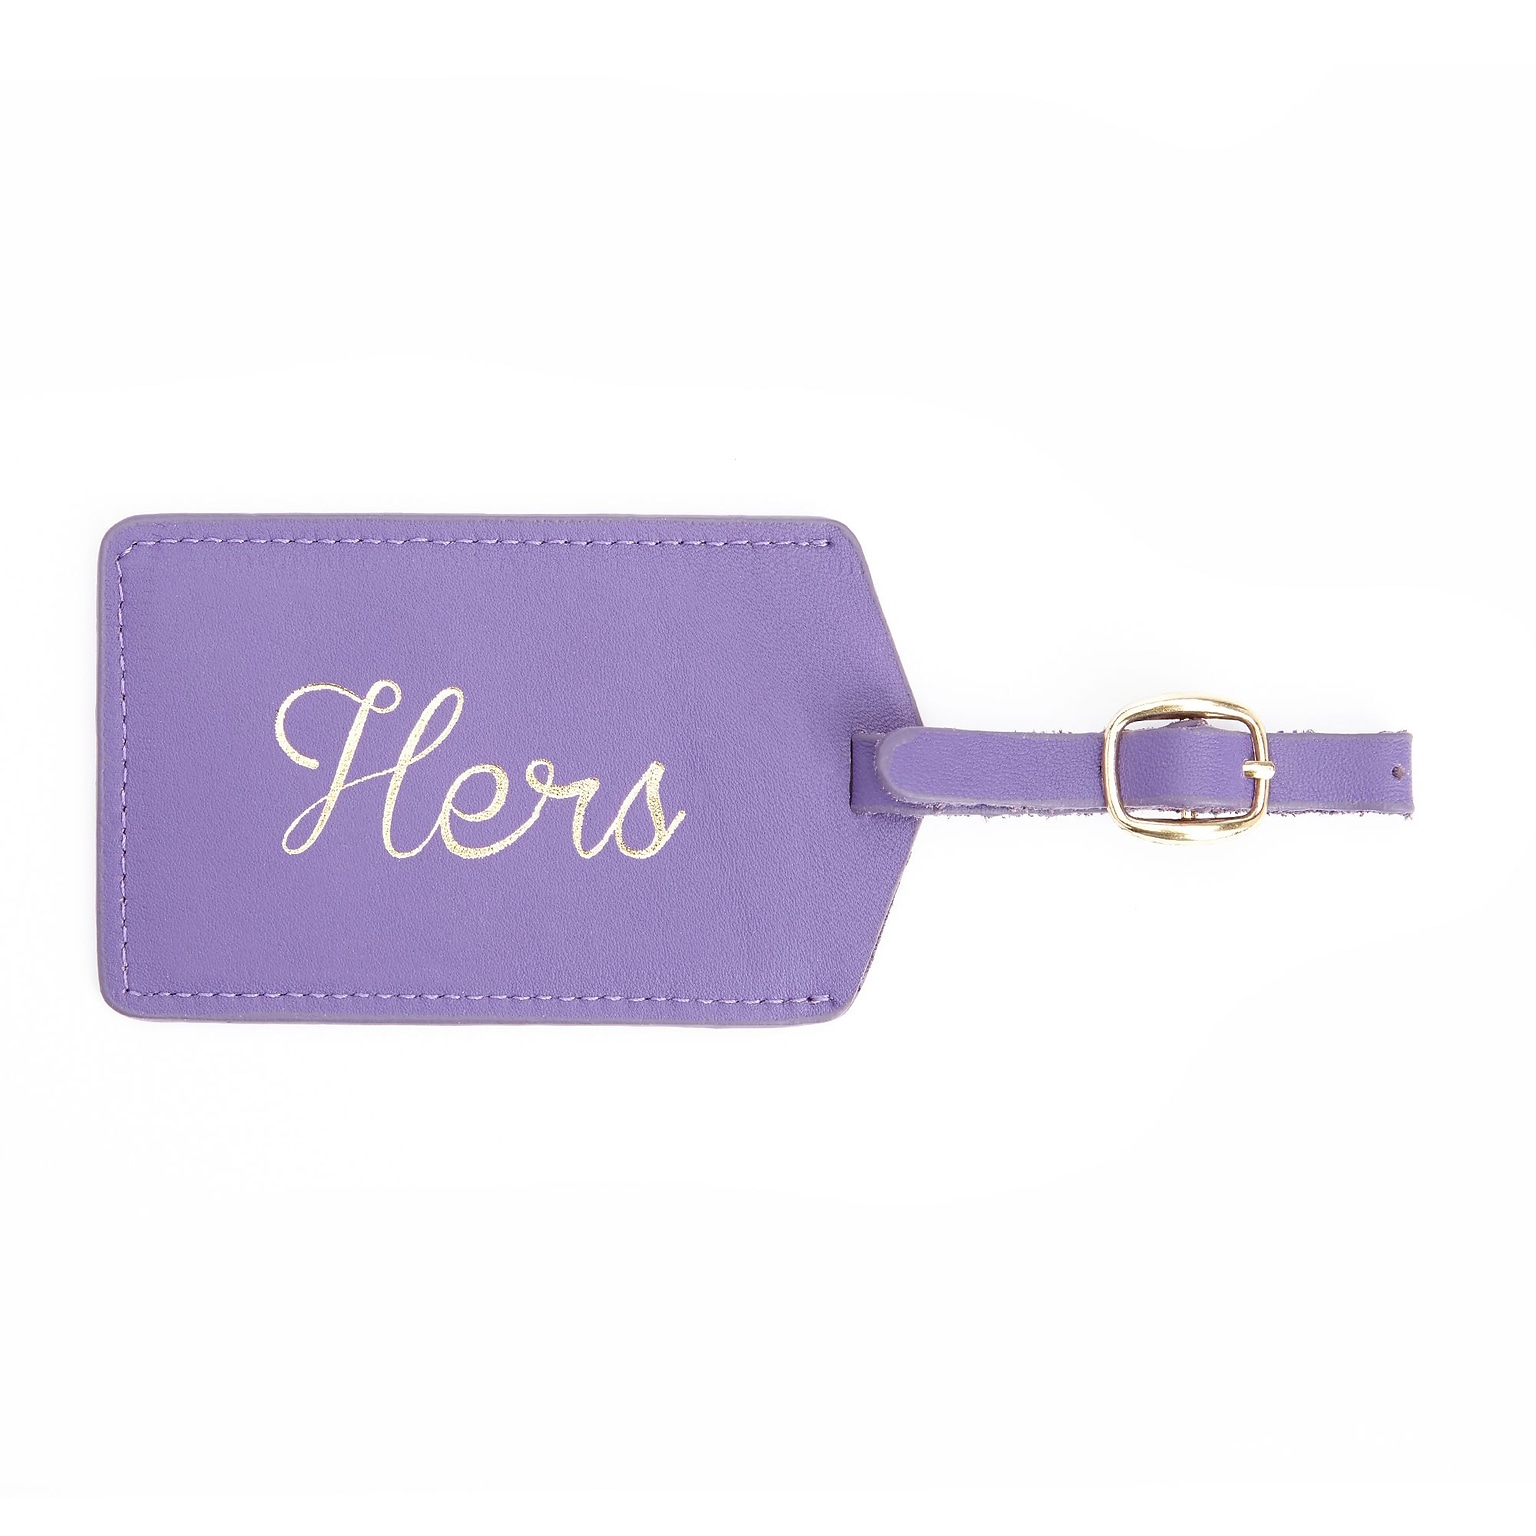 Royce Leather Luxury Luggage Hang Tag ID Hers(956-HERS-PUR)